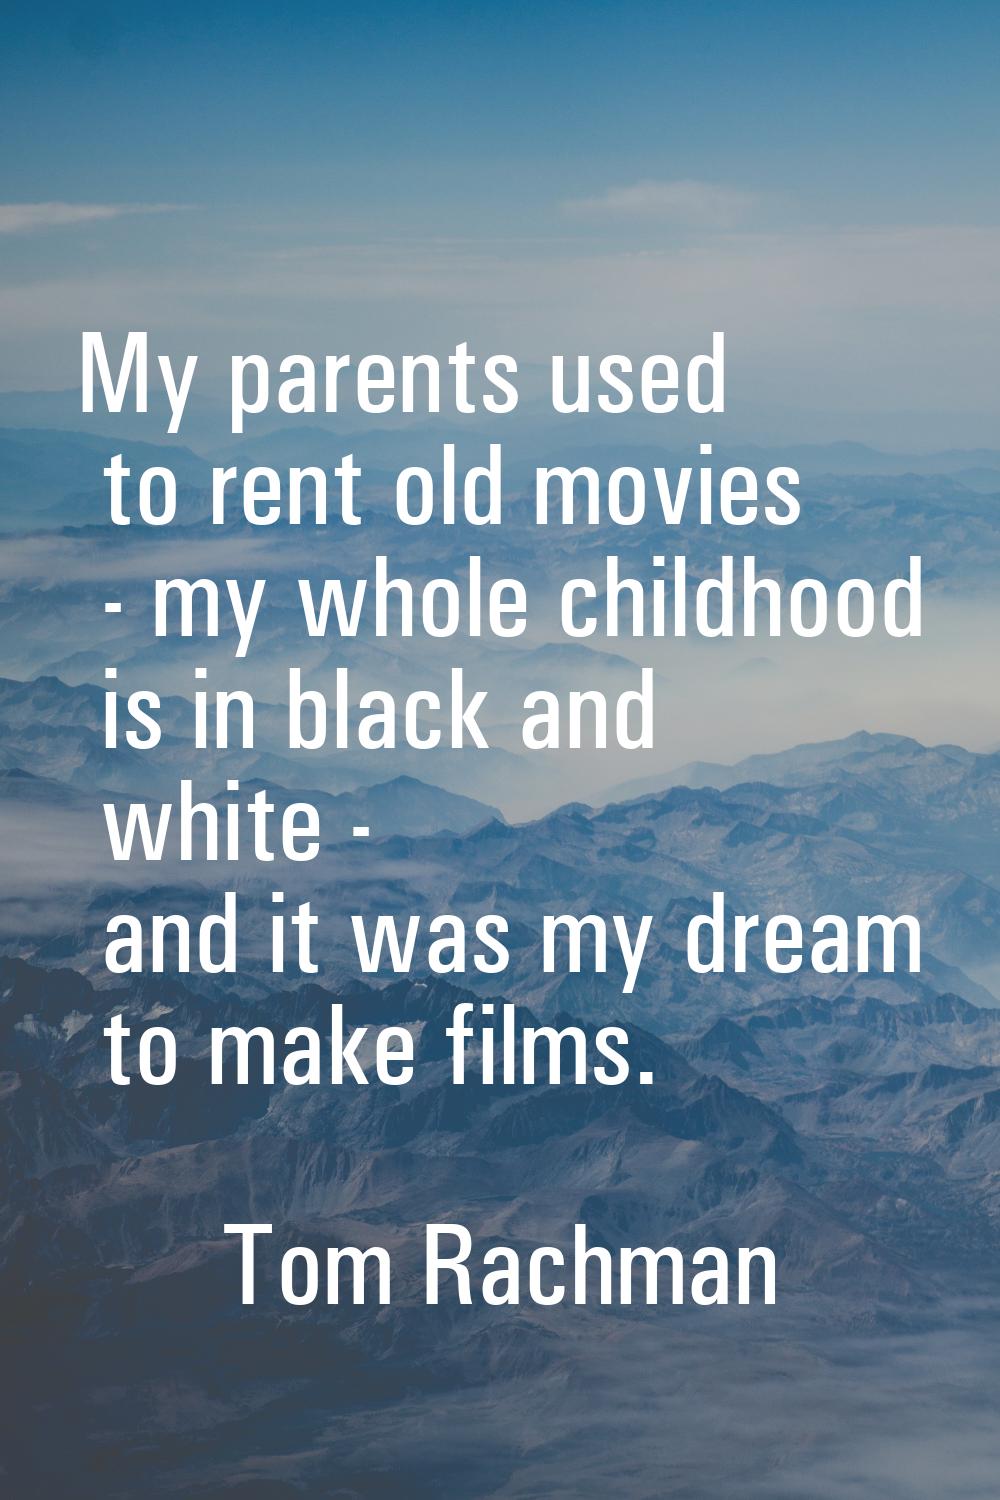 My parents used to rent old movies - my whole childhood is in black and white - and it was my dream